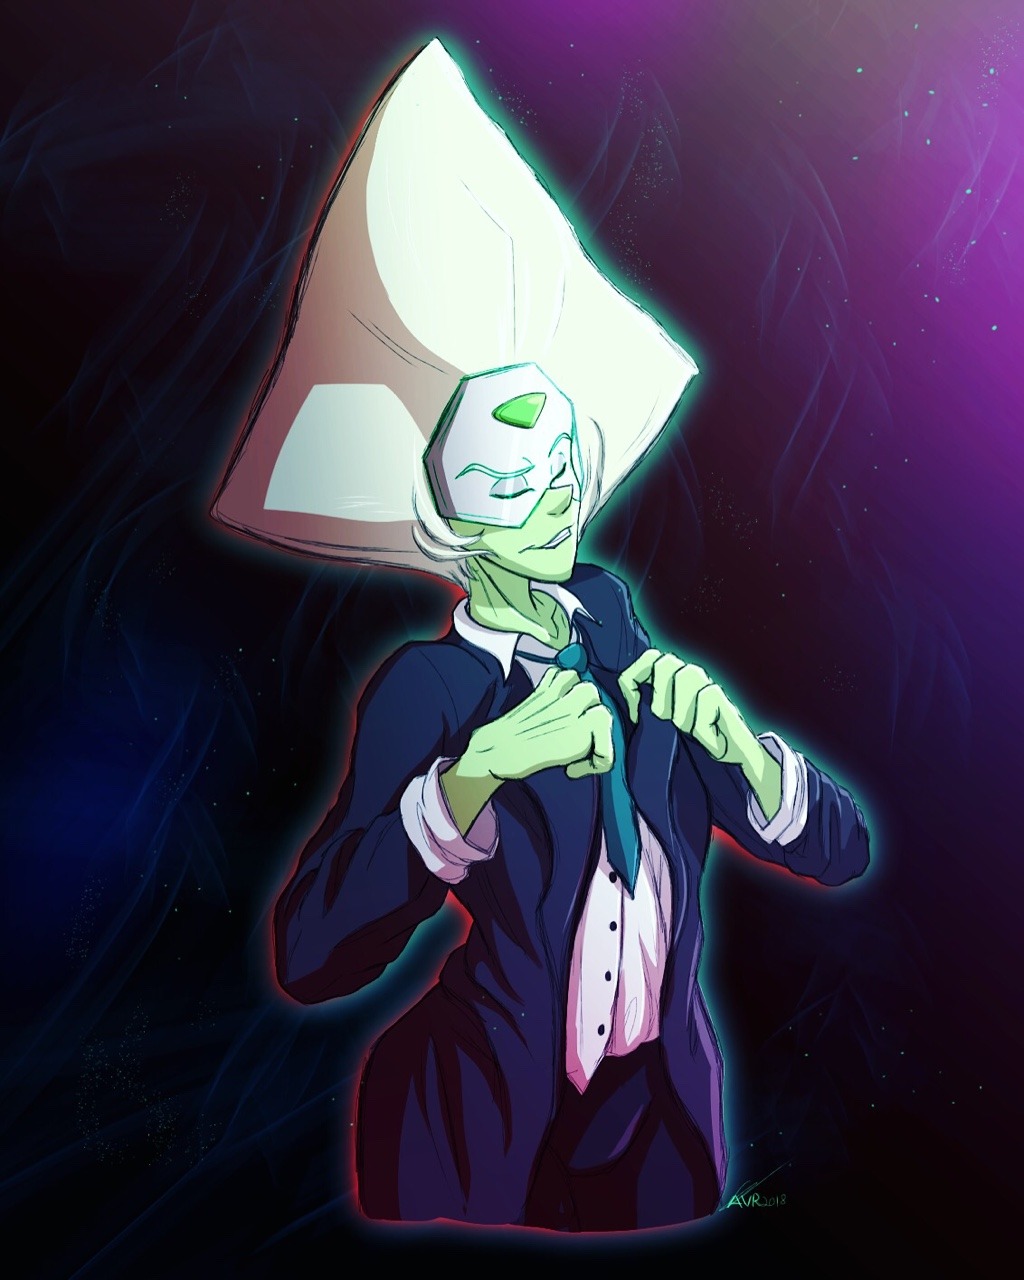 Peri in a tux is all I need in life.